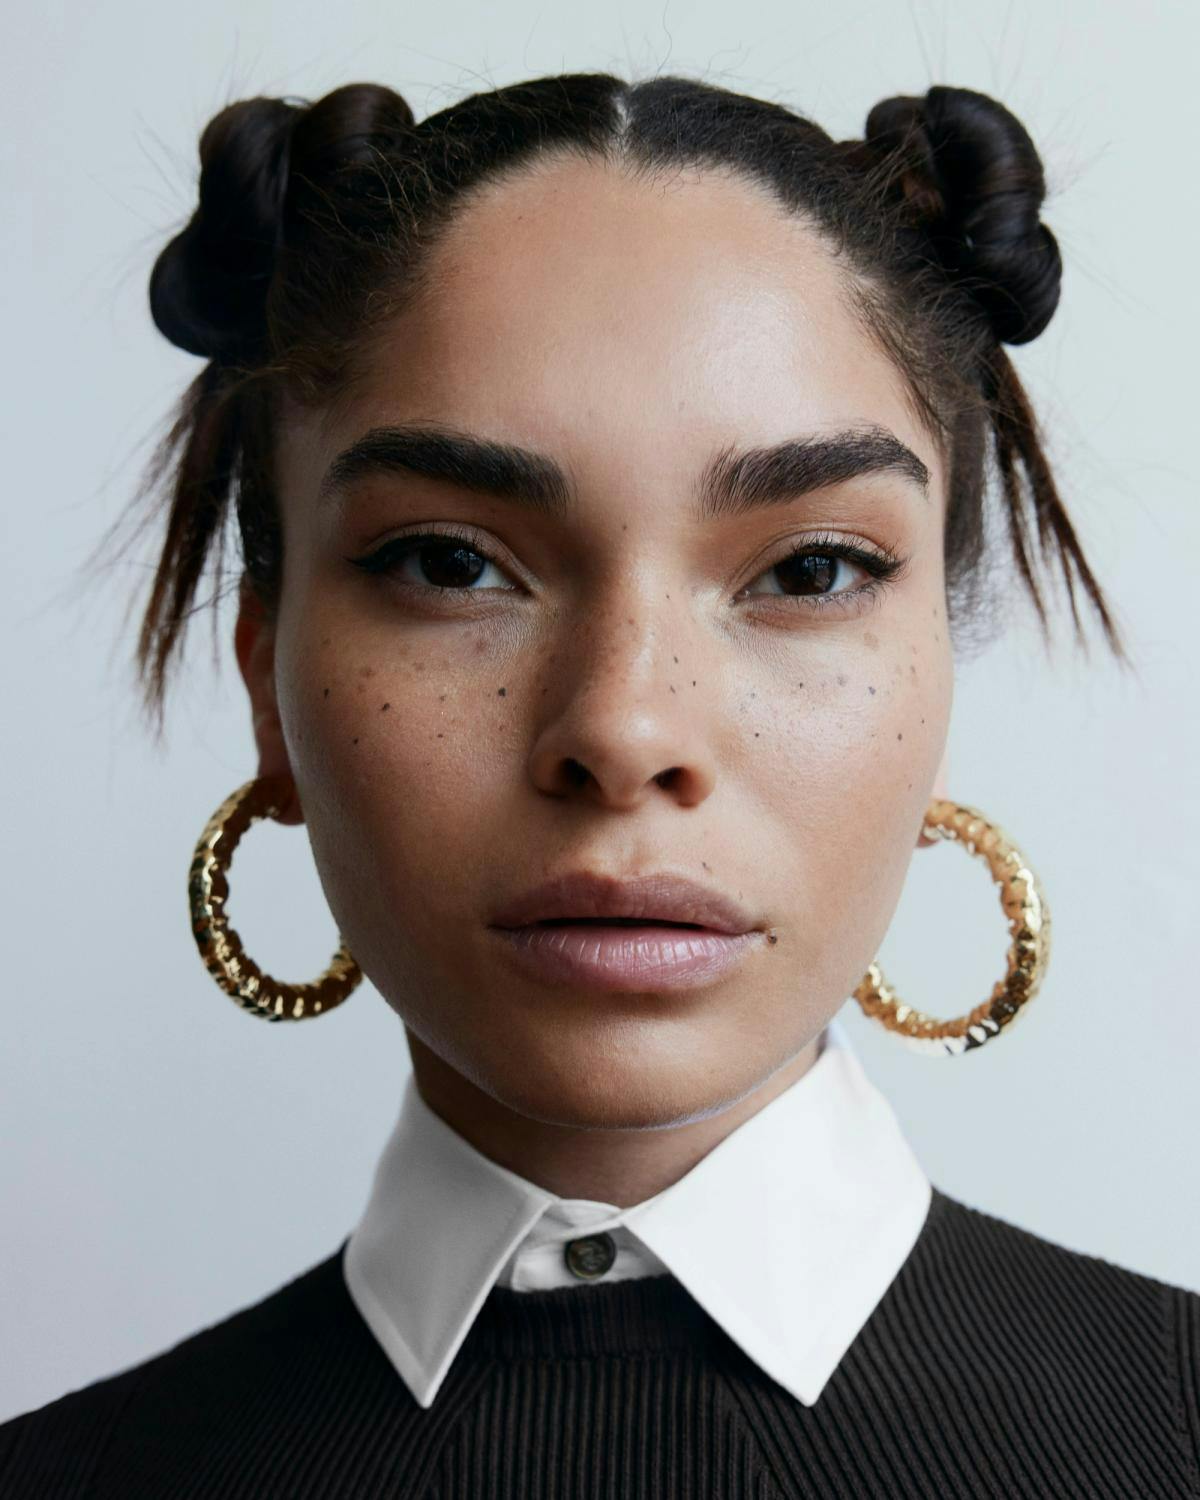 Image of a model facing the camera wearing medium sized thick gold hoops. 